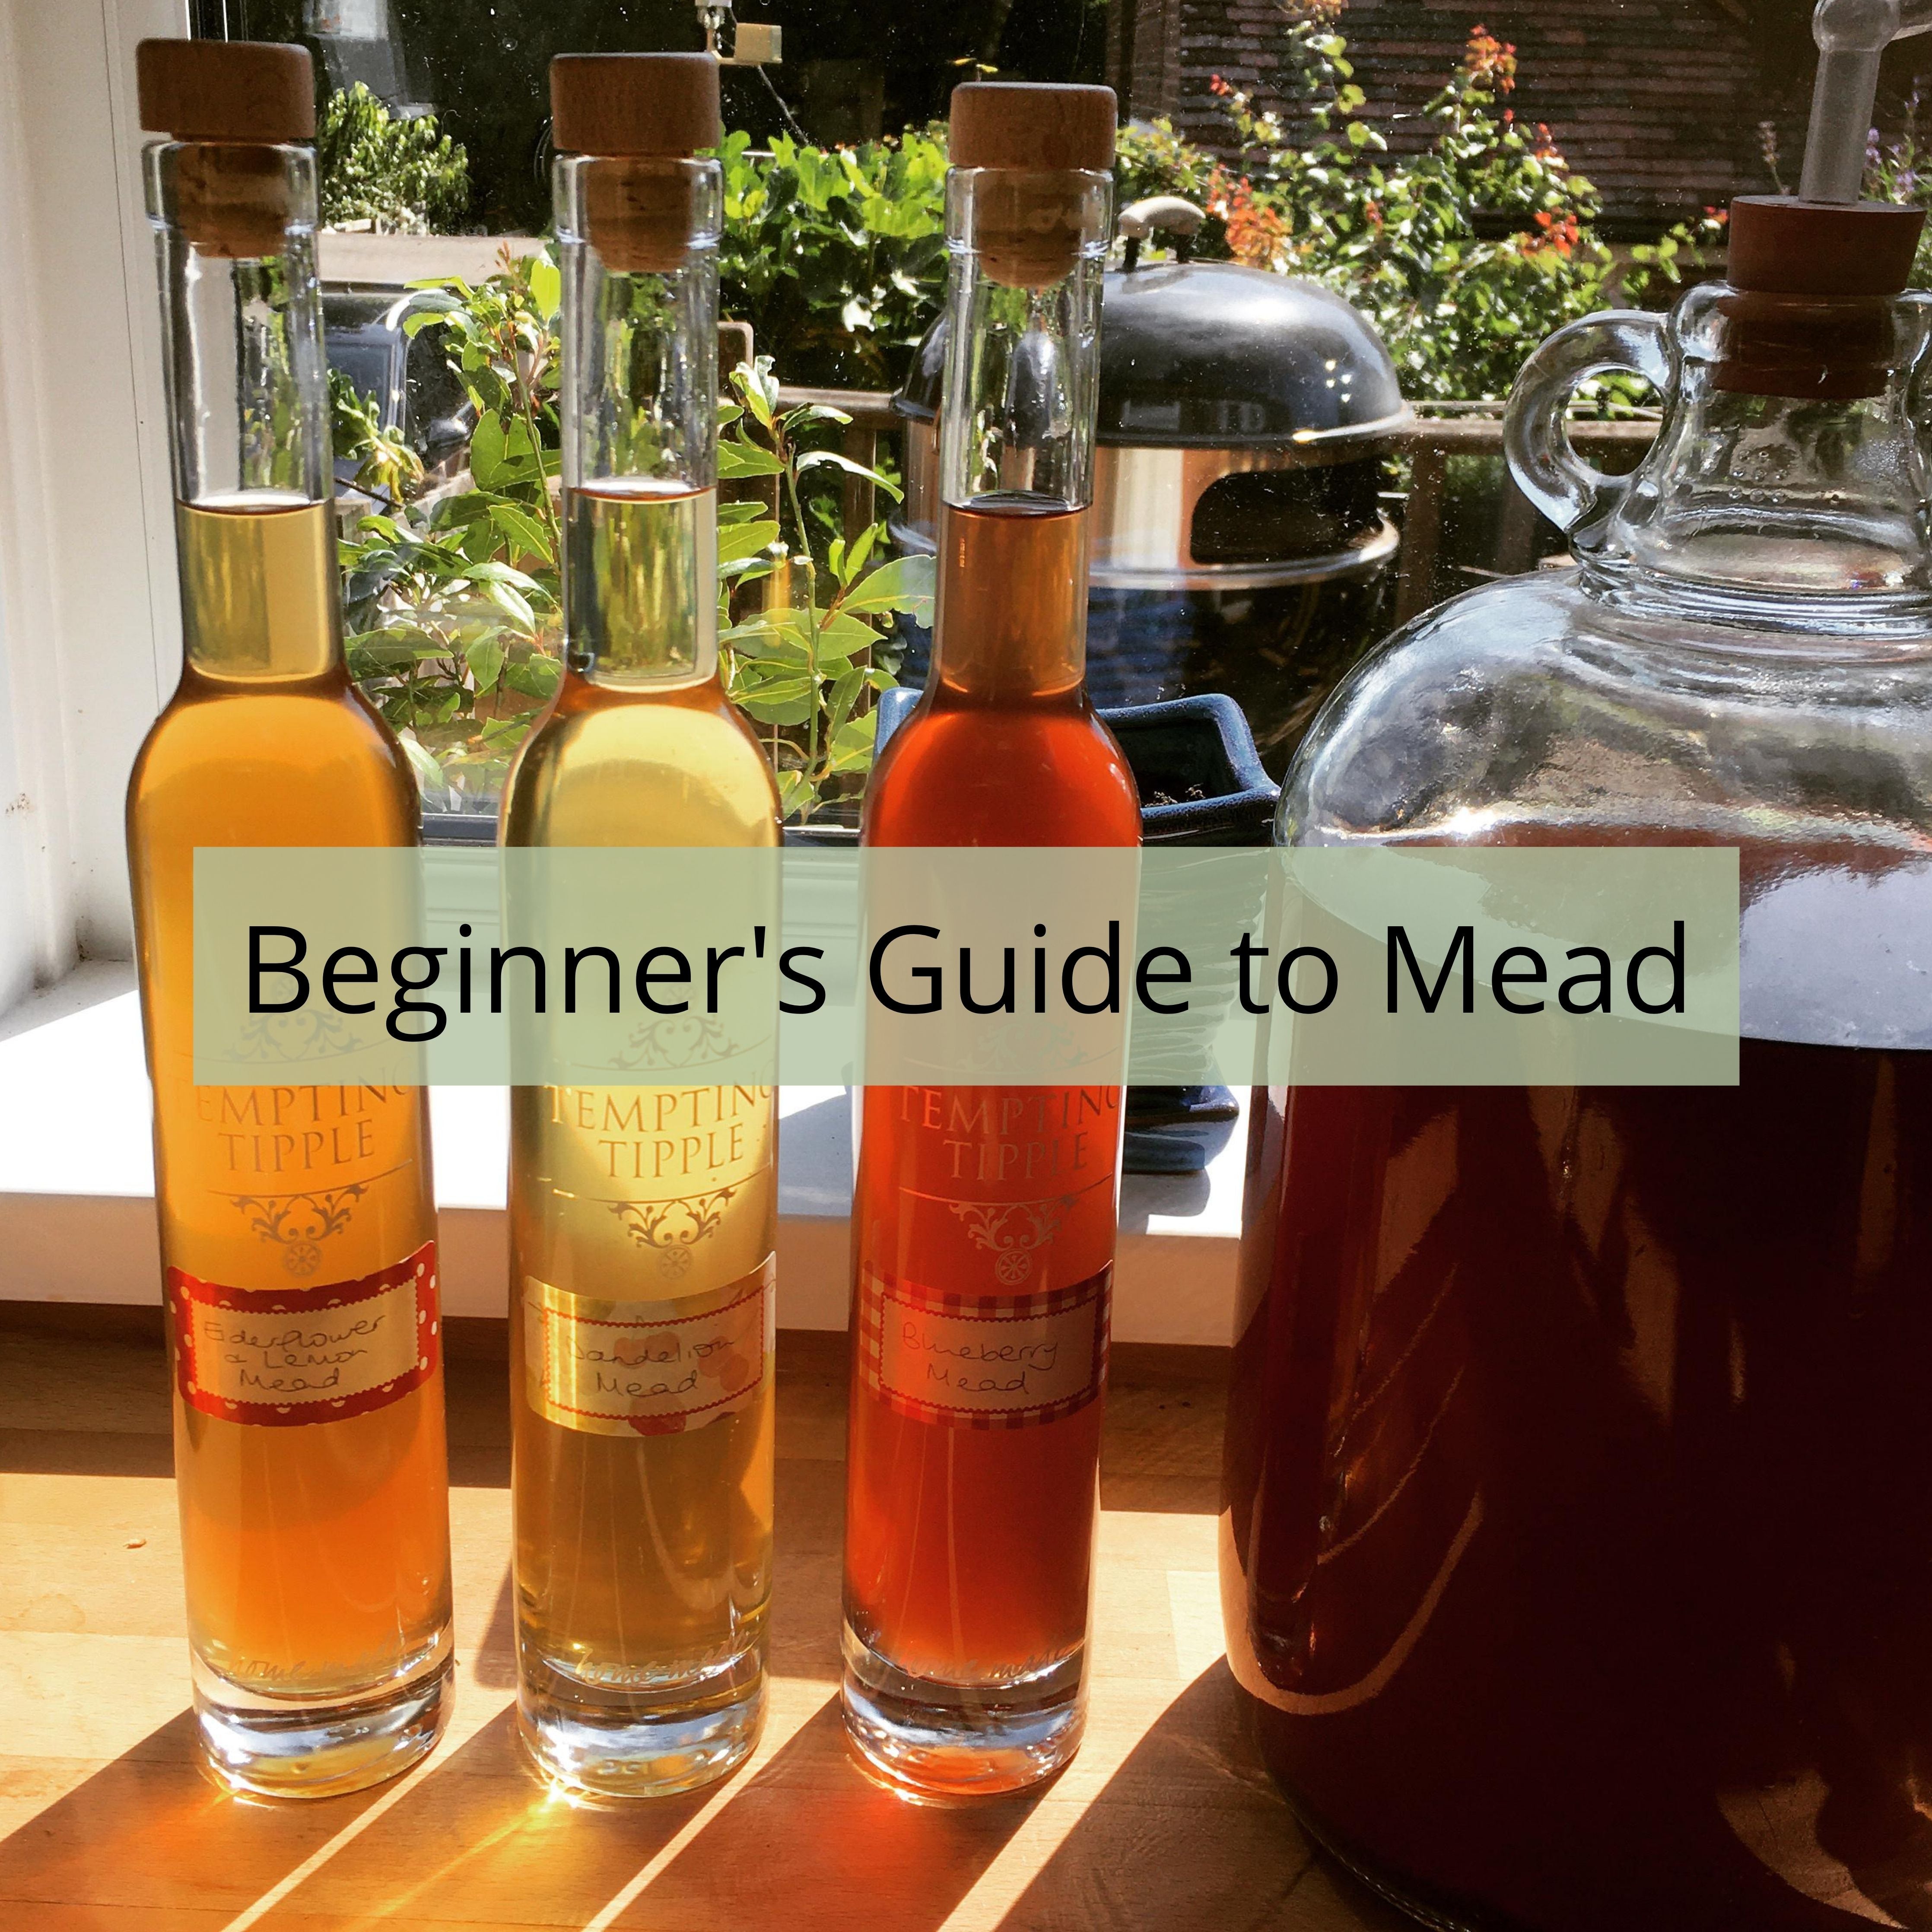 II. The History of Mead